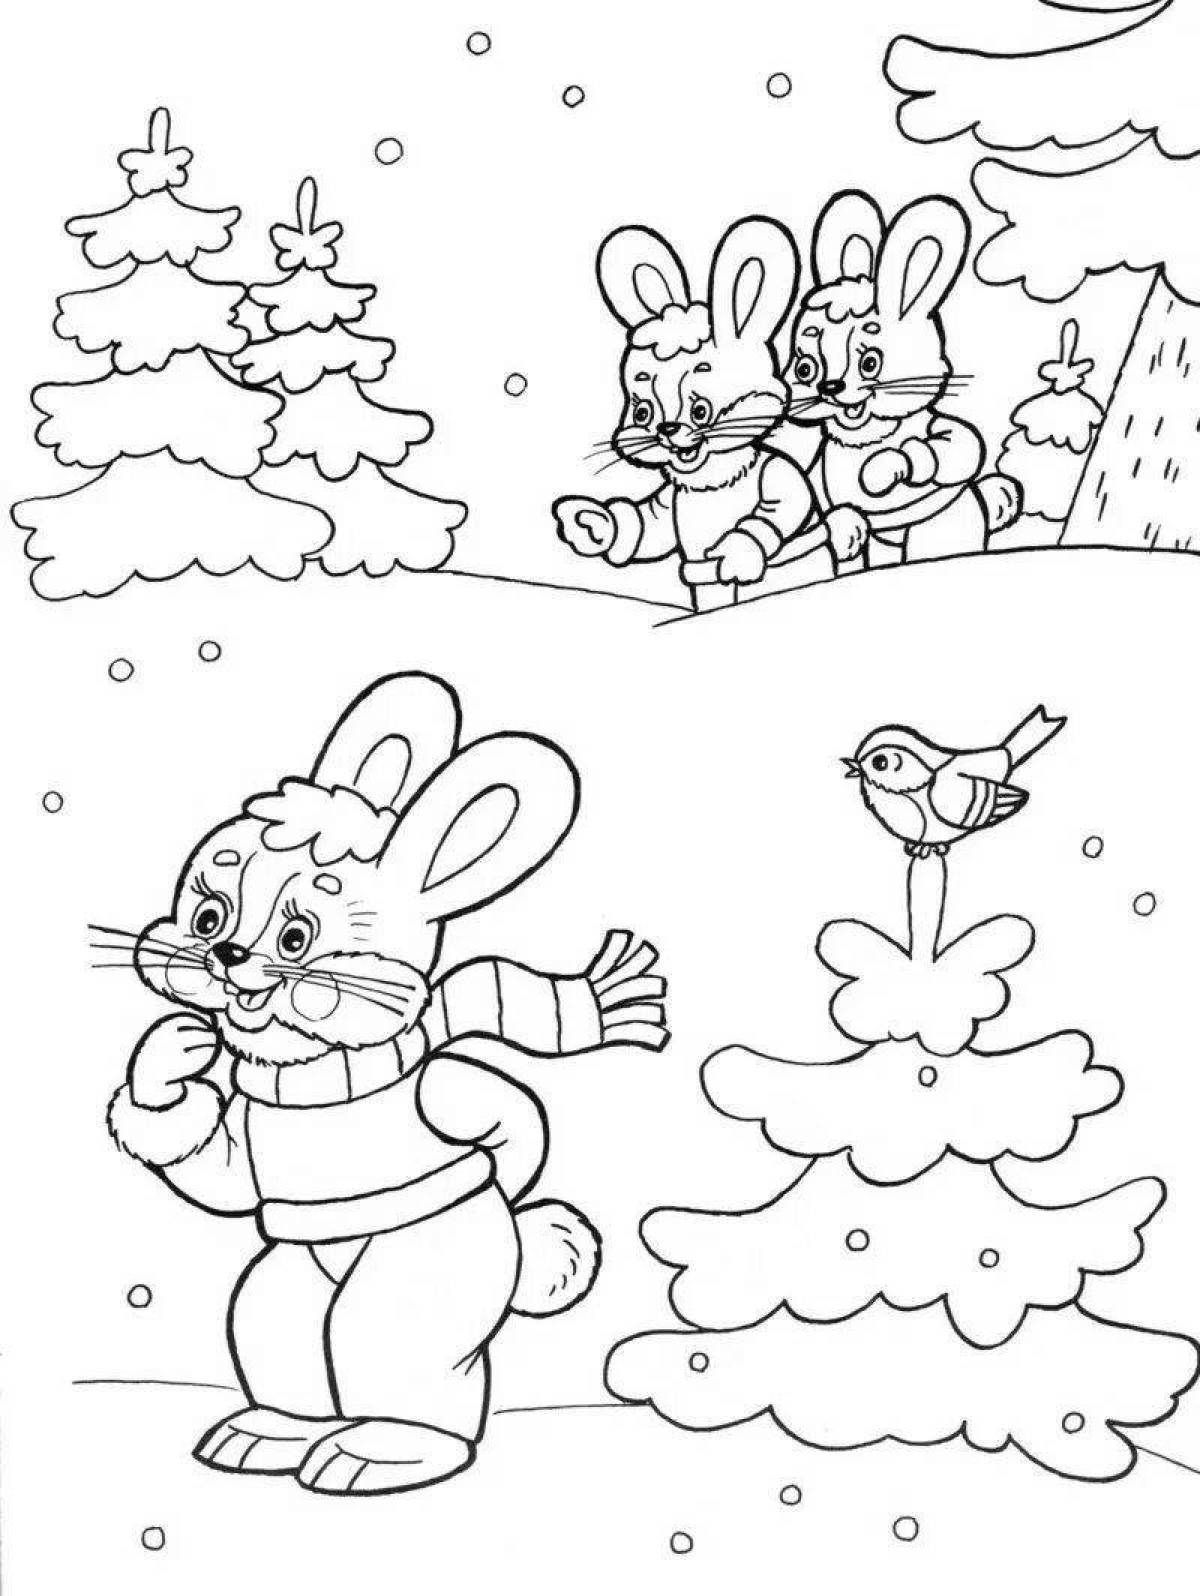 Coloring book playful hare and tree